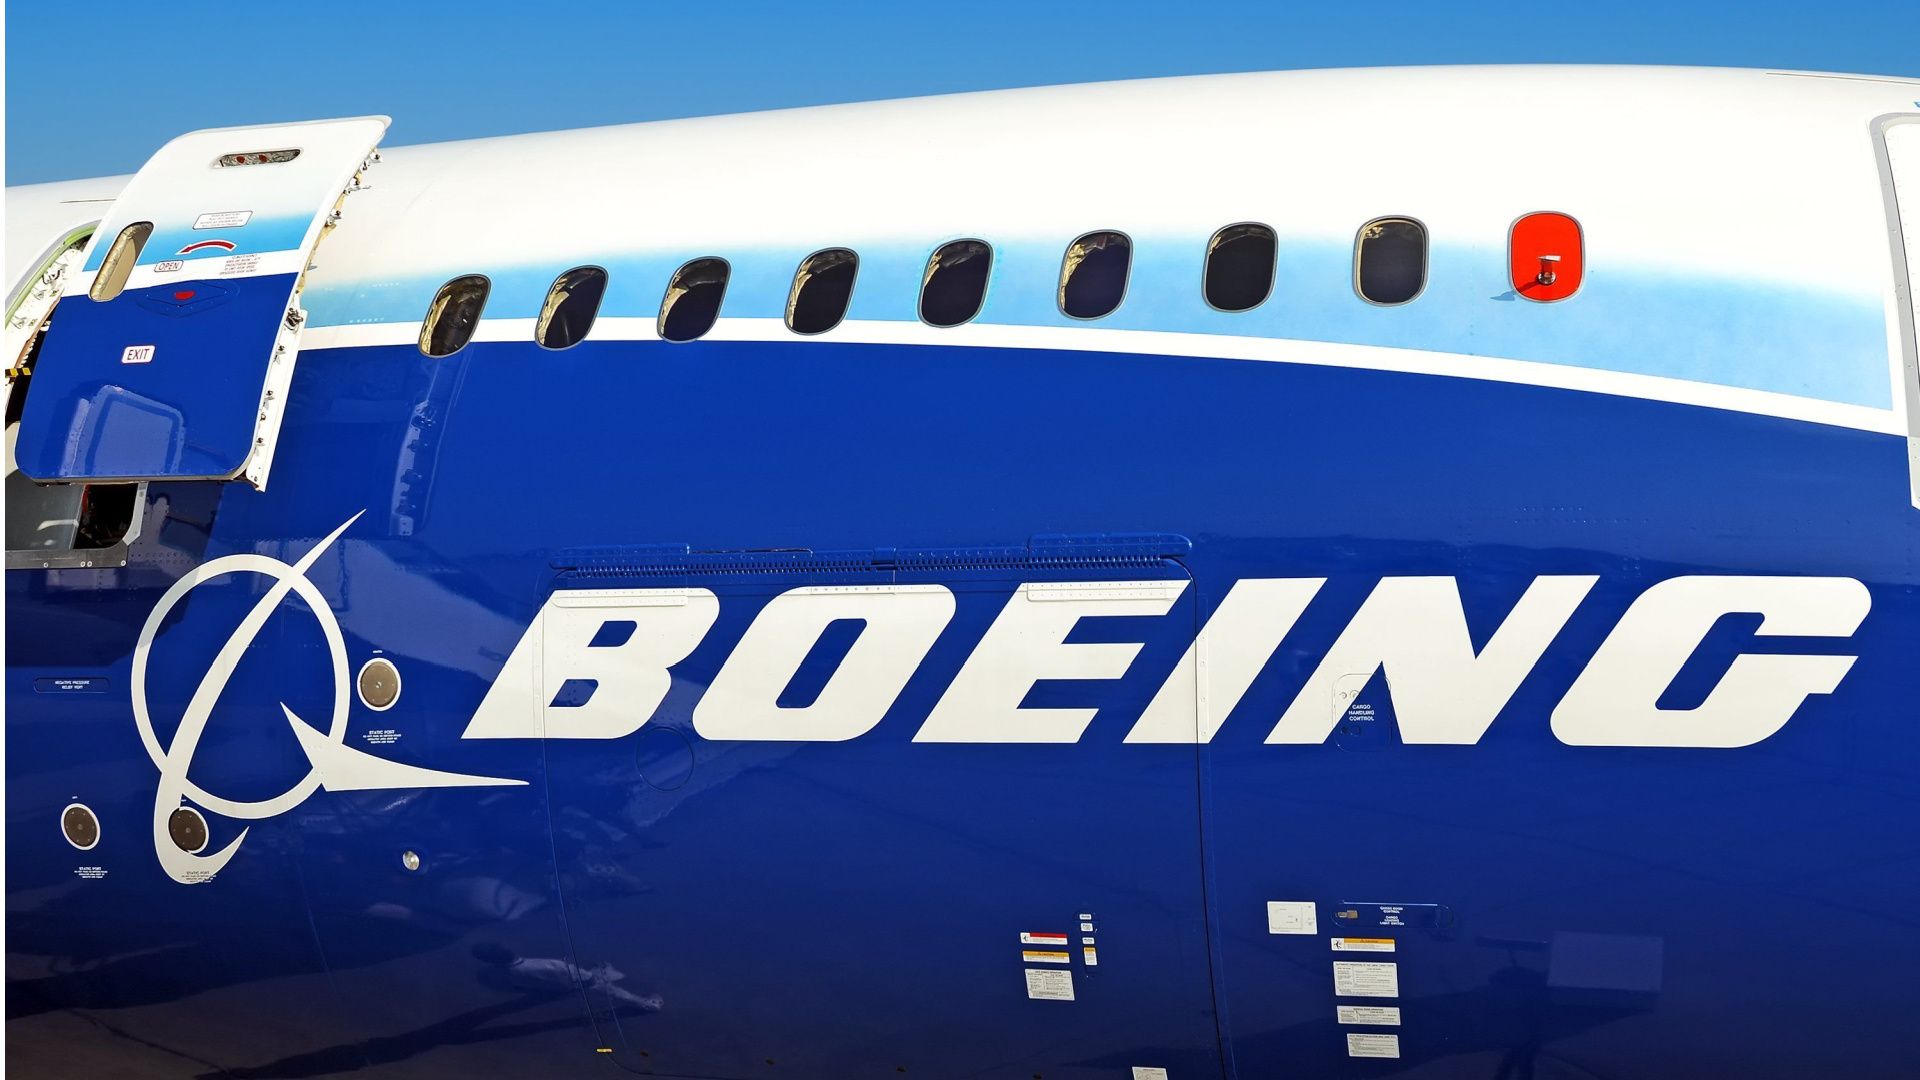 A closeup of a Boeing 787 fuselage.